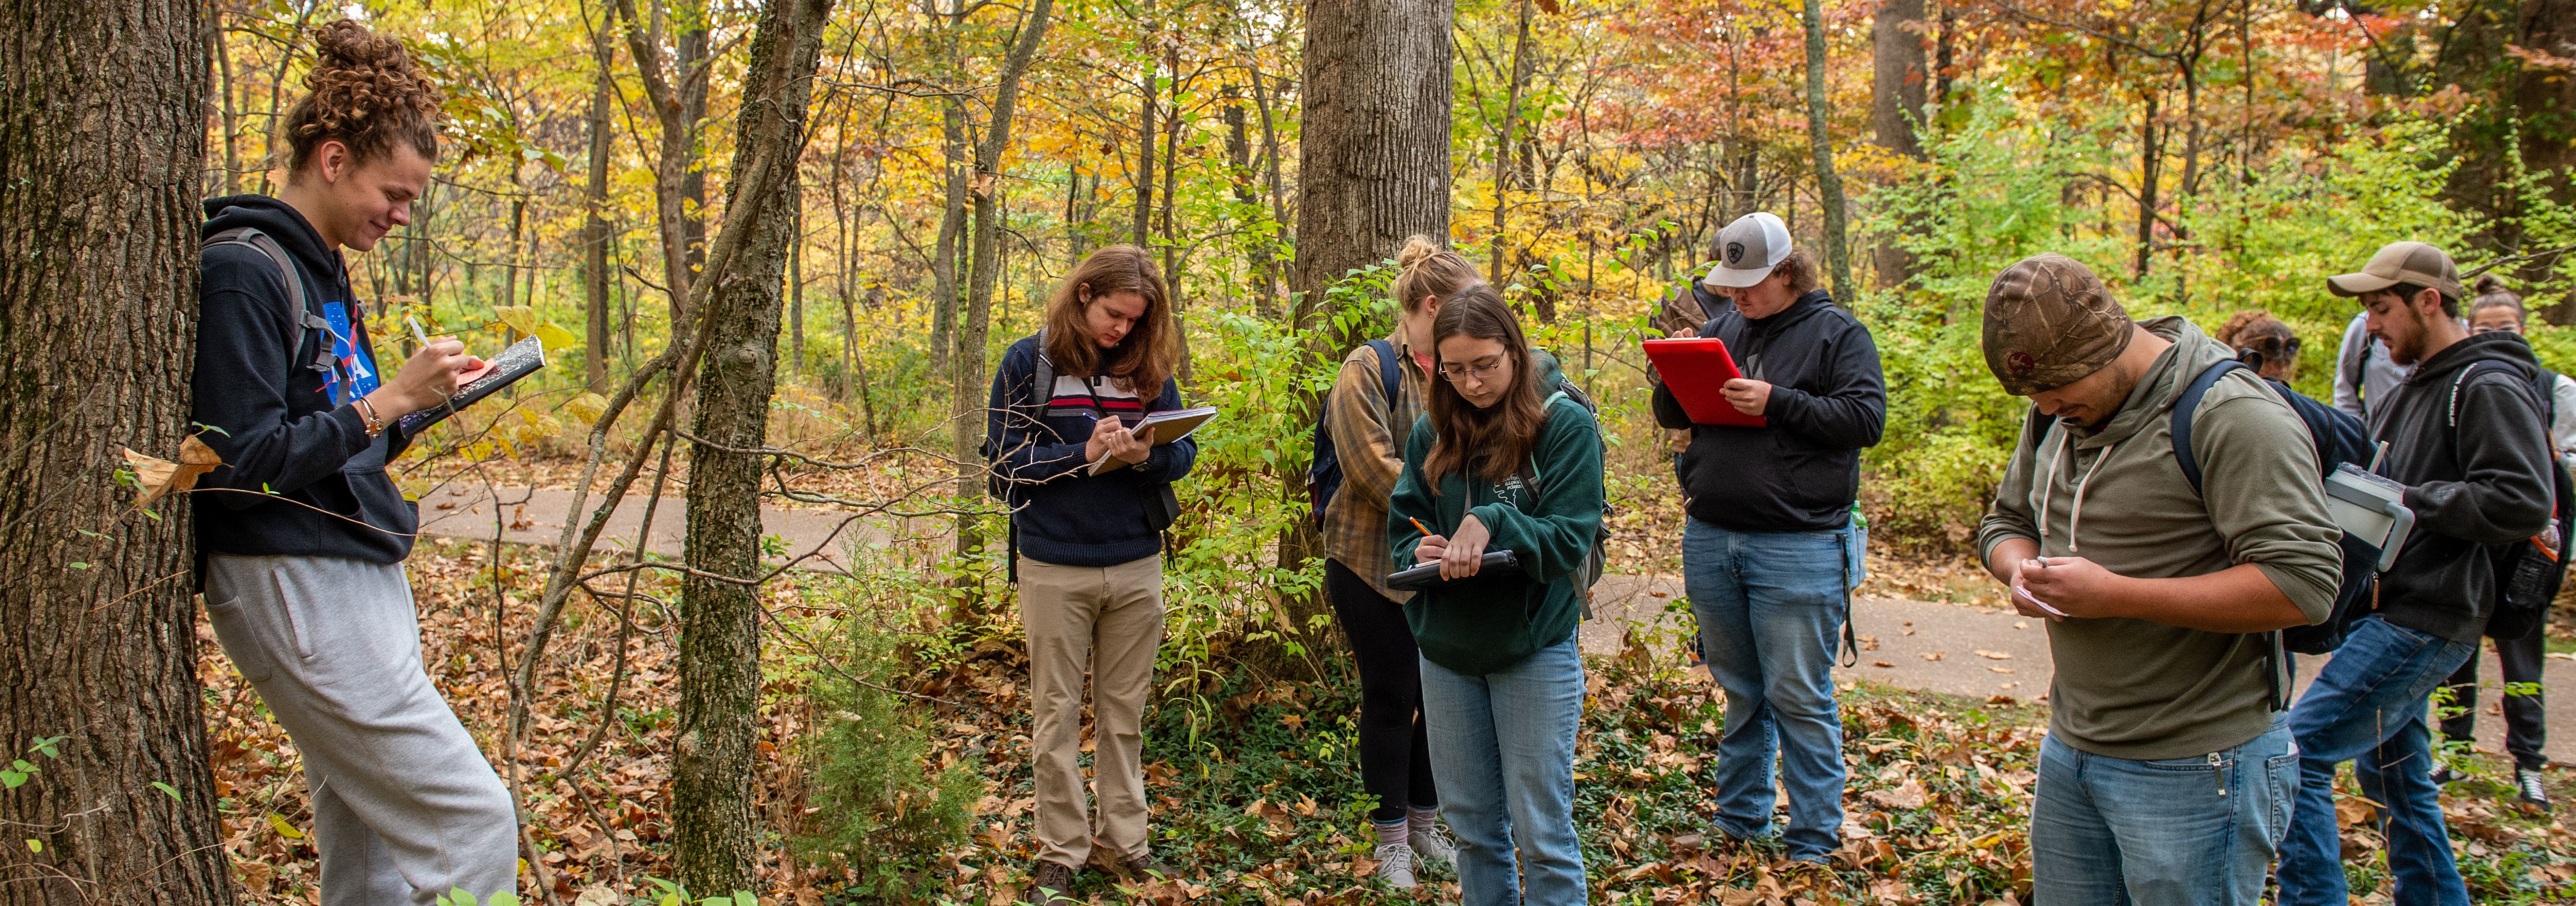 Students gathered in forest reviewing notes